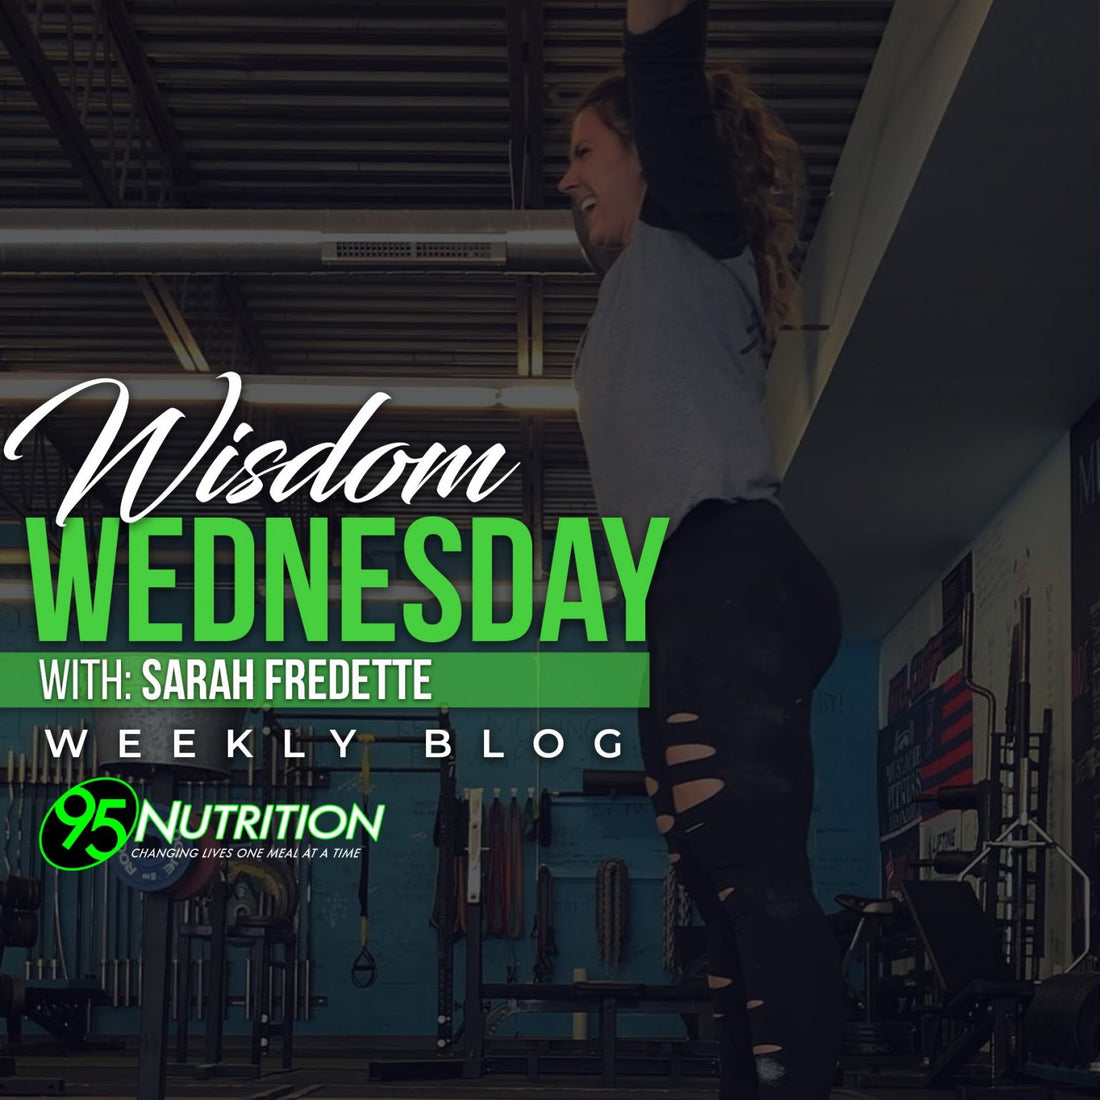 WISDOM WEDNESDAY WITH SARAH: UNDEFINABLE